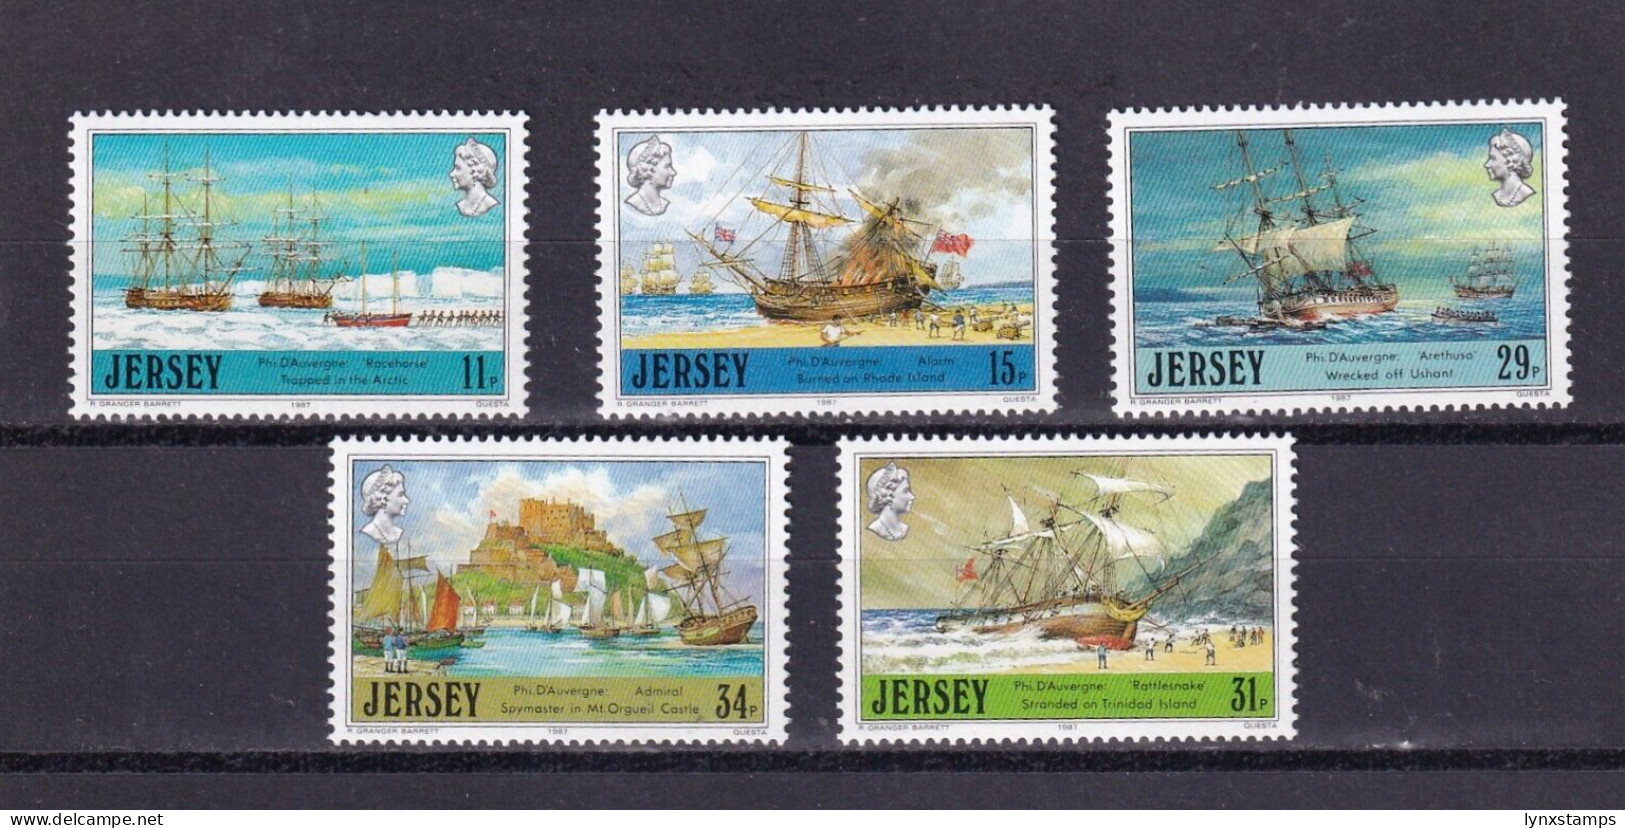 LI01 Jersey Great Britain 1987 Ships - Philippe D'Auvergne - Local Issues